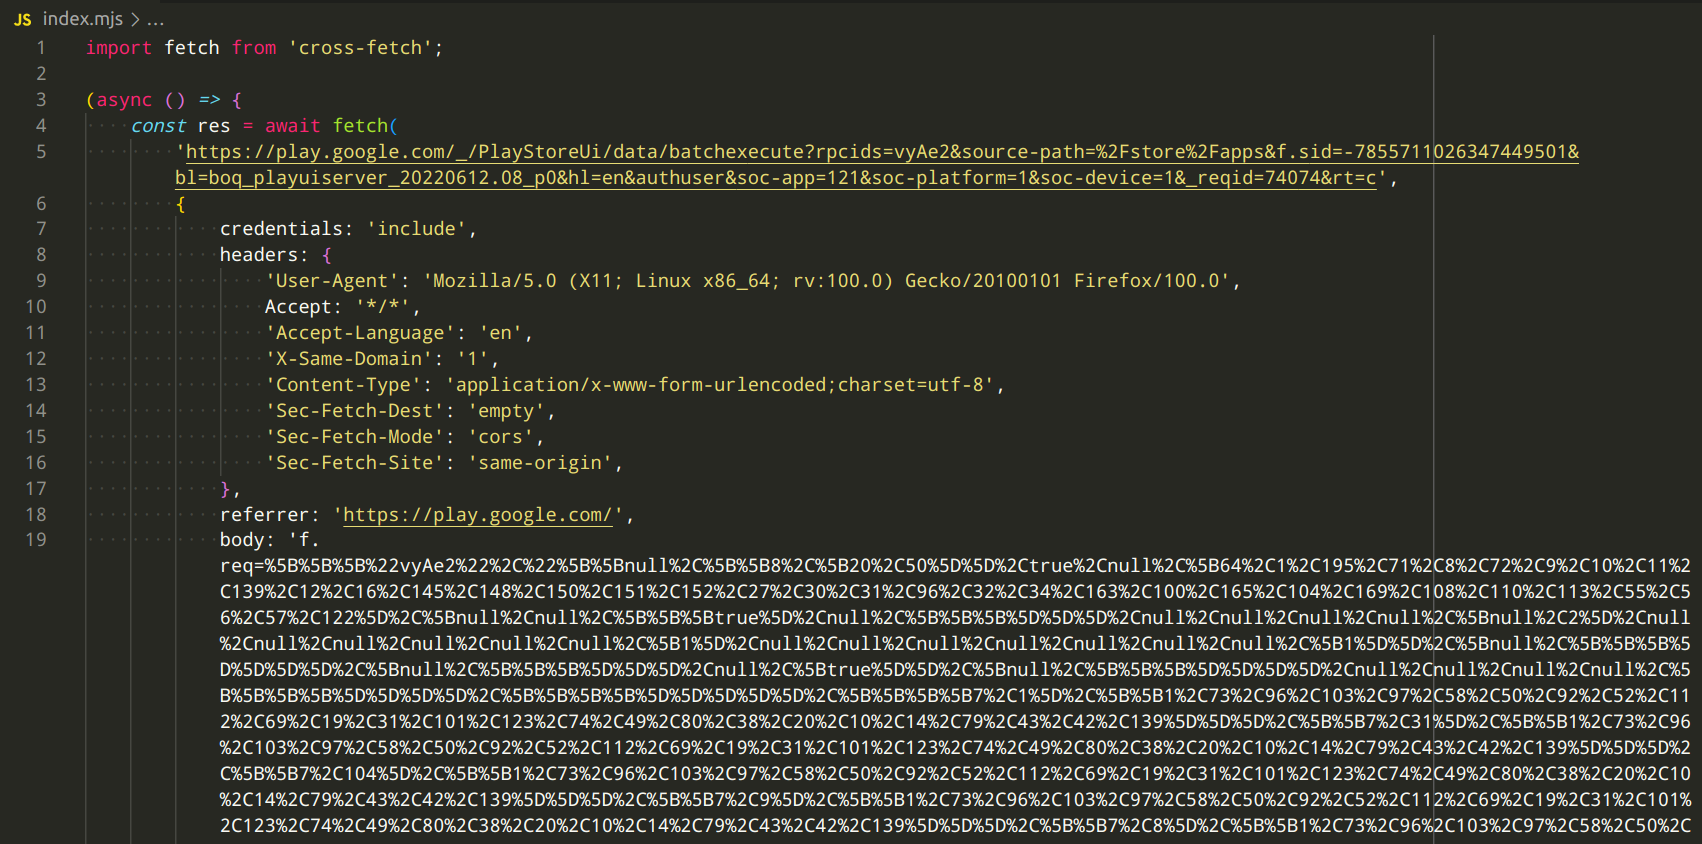 Screenshot of some JavaScript source code. The code uses fetch() to replicate the observed request to the batchexecute endpoint. The code is too long for the screenshot and cut off. The full code is available in the Gist linked below.